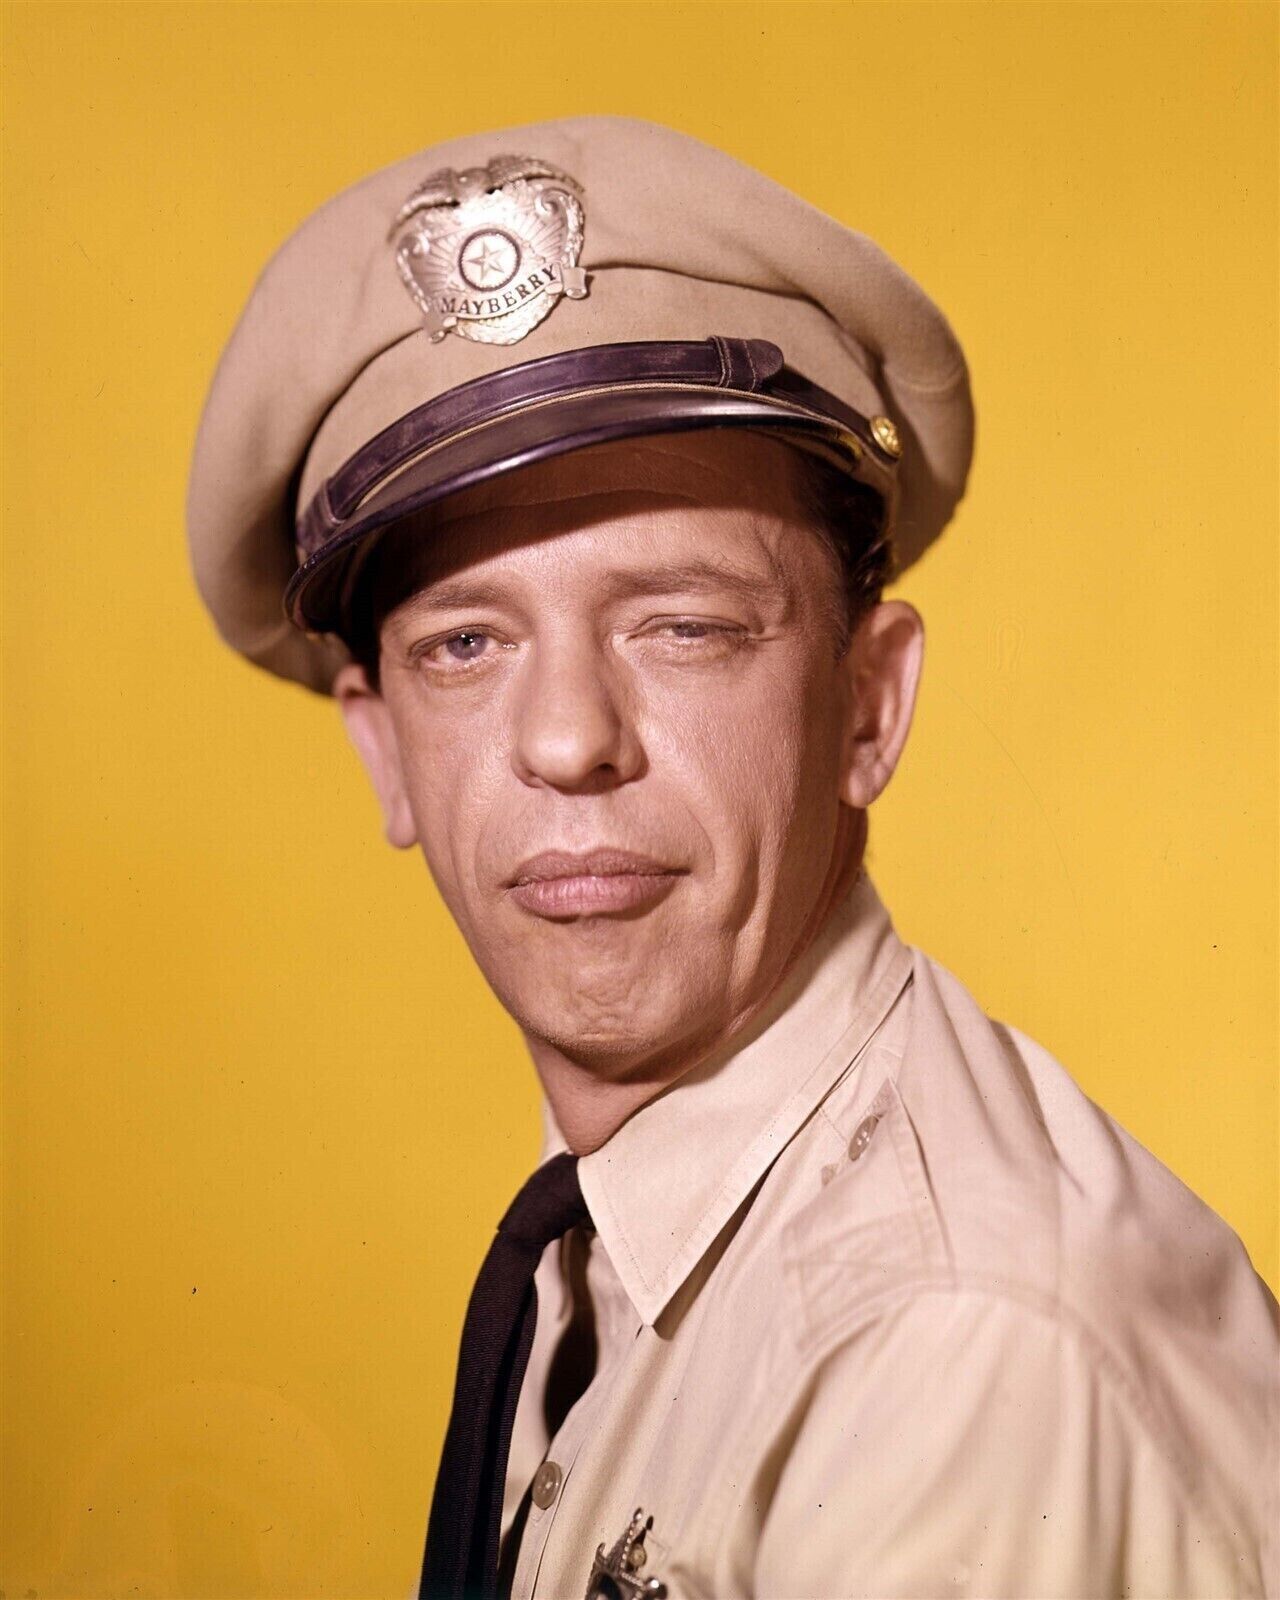 Don Knotts classic as Barney Fife in uniform Andy Griffith Show 4x6 photo inch